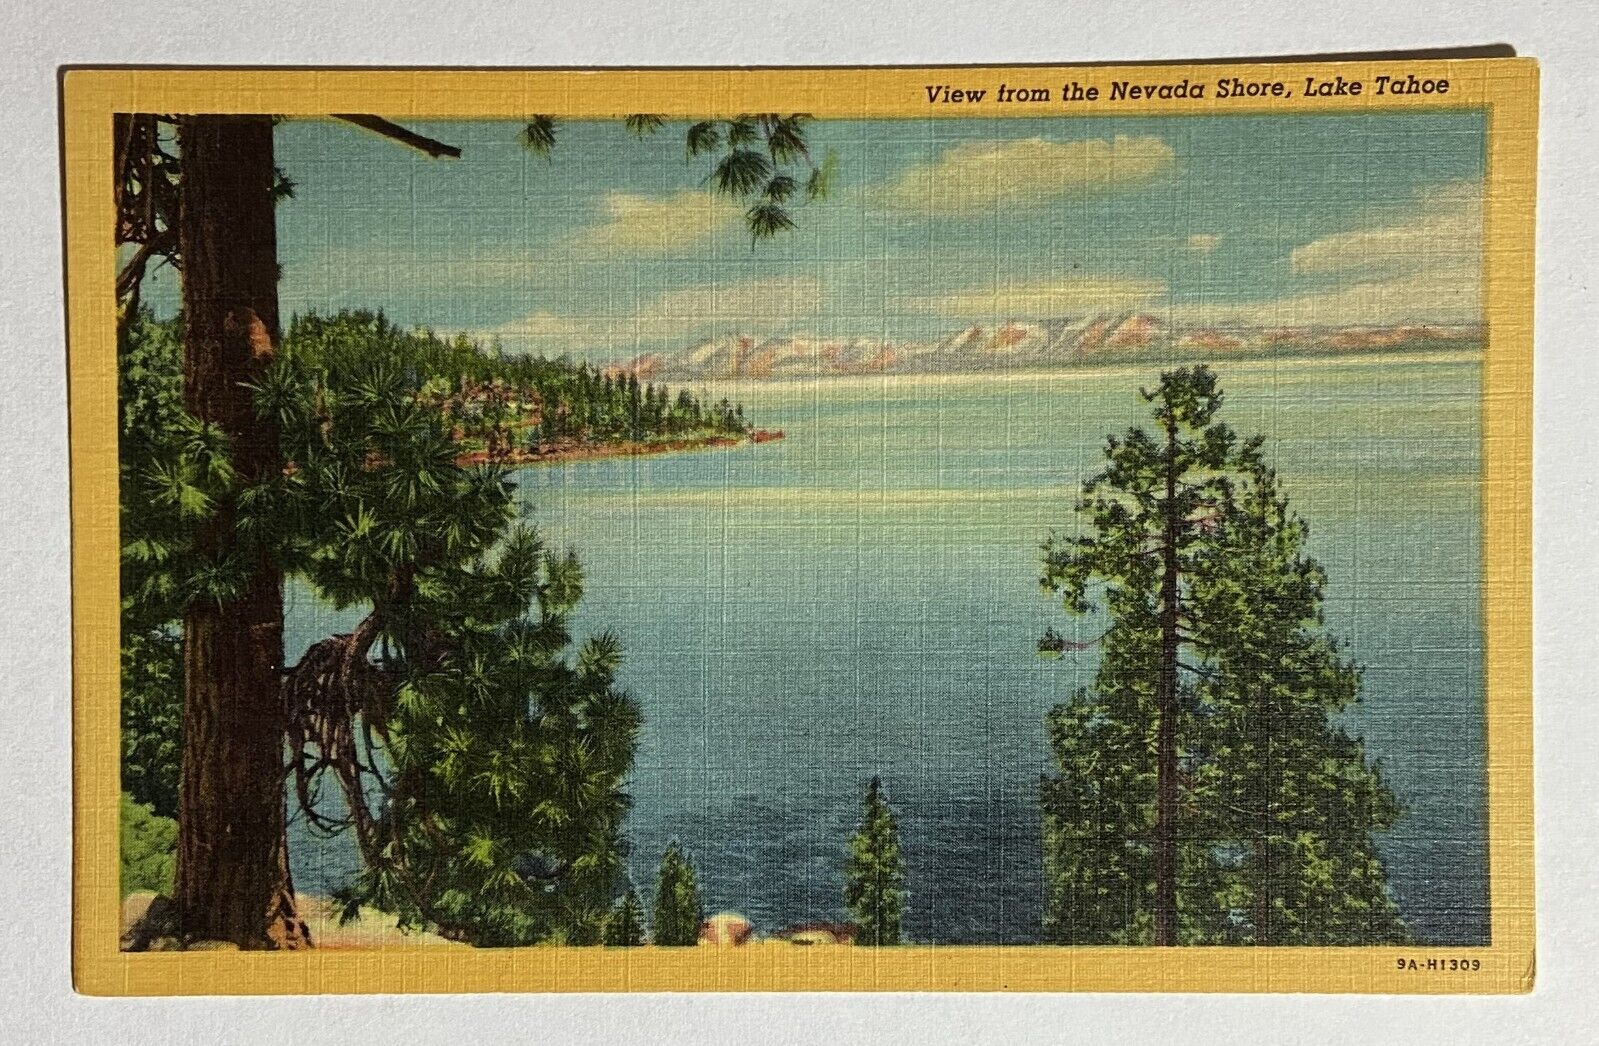 Old Vintage Postcard Greeting Picture View Nevada Shore Lake Tahoe